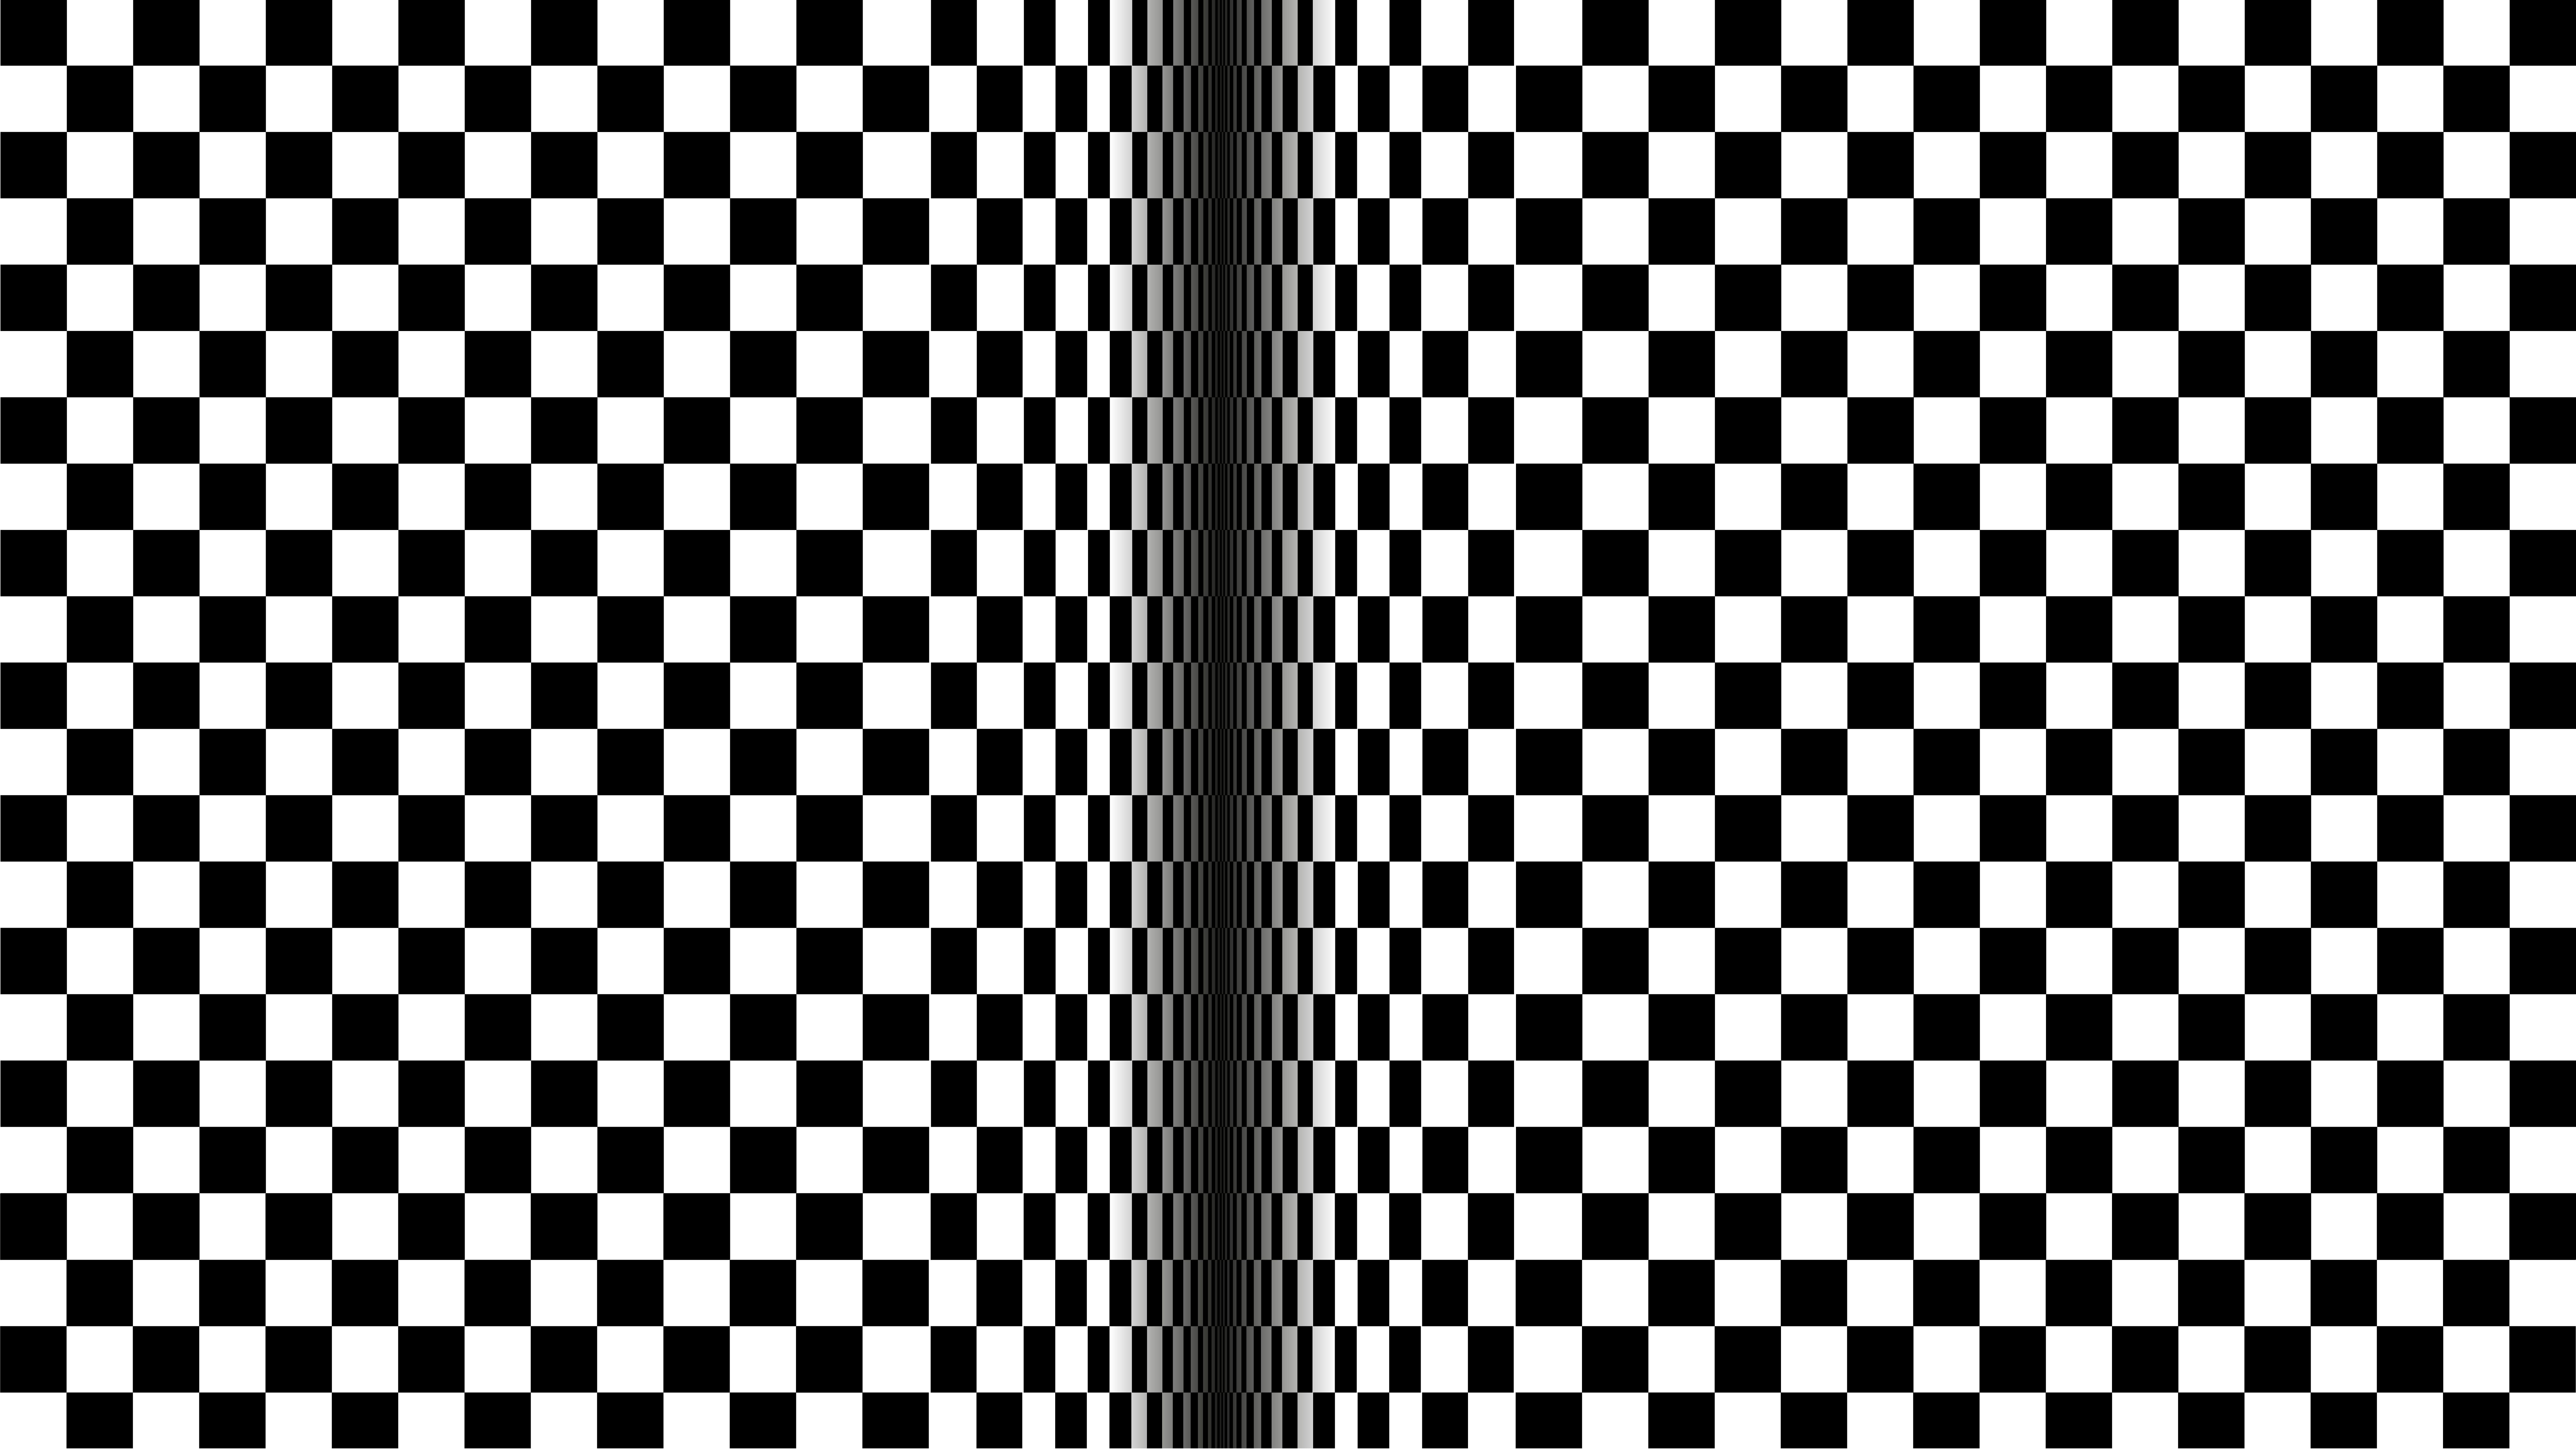 bw, illusion, optical illusion, lines, cuba, chb, movement, texture, traffic, textures iphone wallpaper